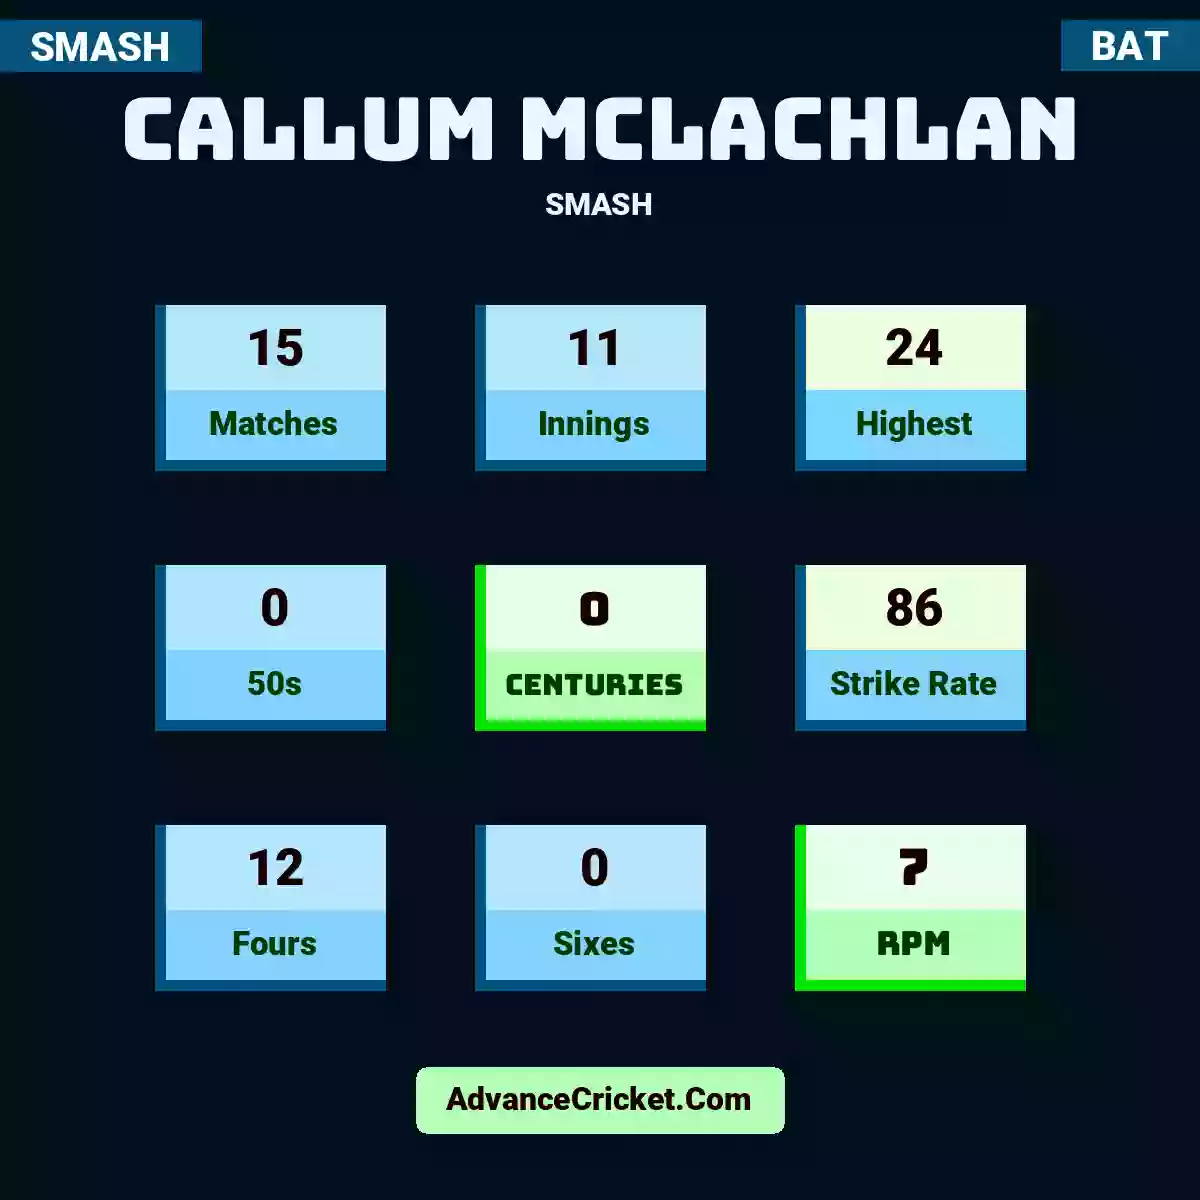 Callum McLachlan SMASH , Callum McLachlan played 15 matches, scored 24 runs as highest, 0 half-centuries, and 0 centuries, with a strike rate of 86. C.McLachlan hit 12 fours and 0 sixes, with an RPM of 7.